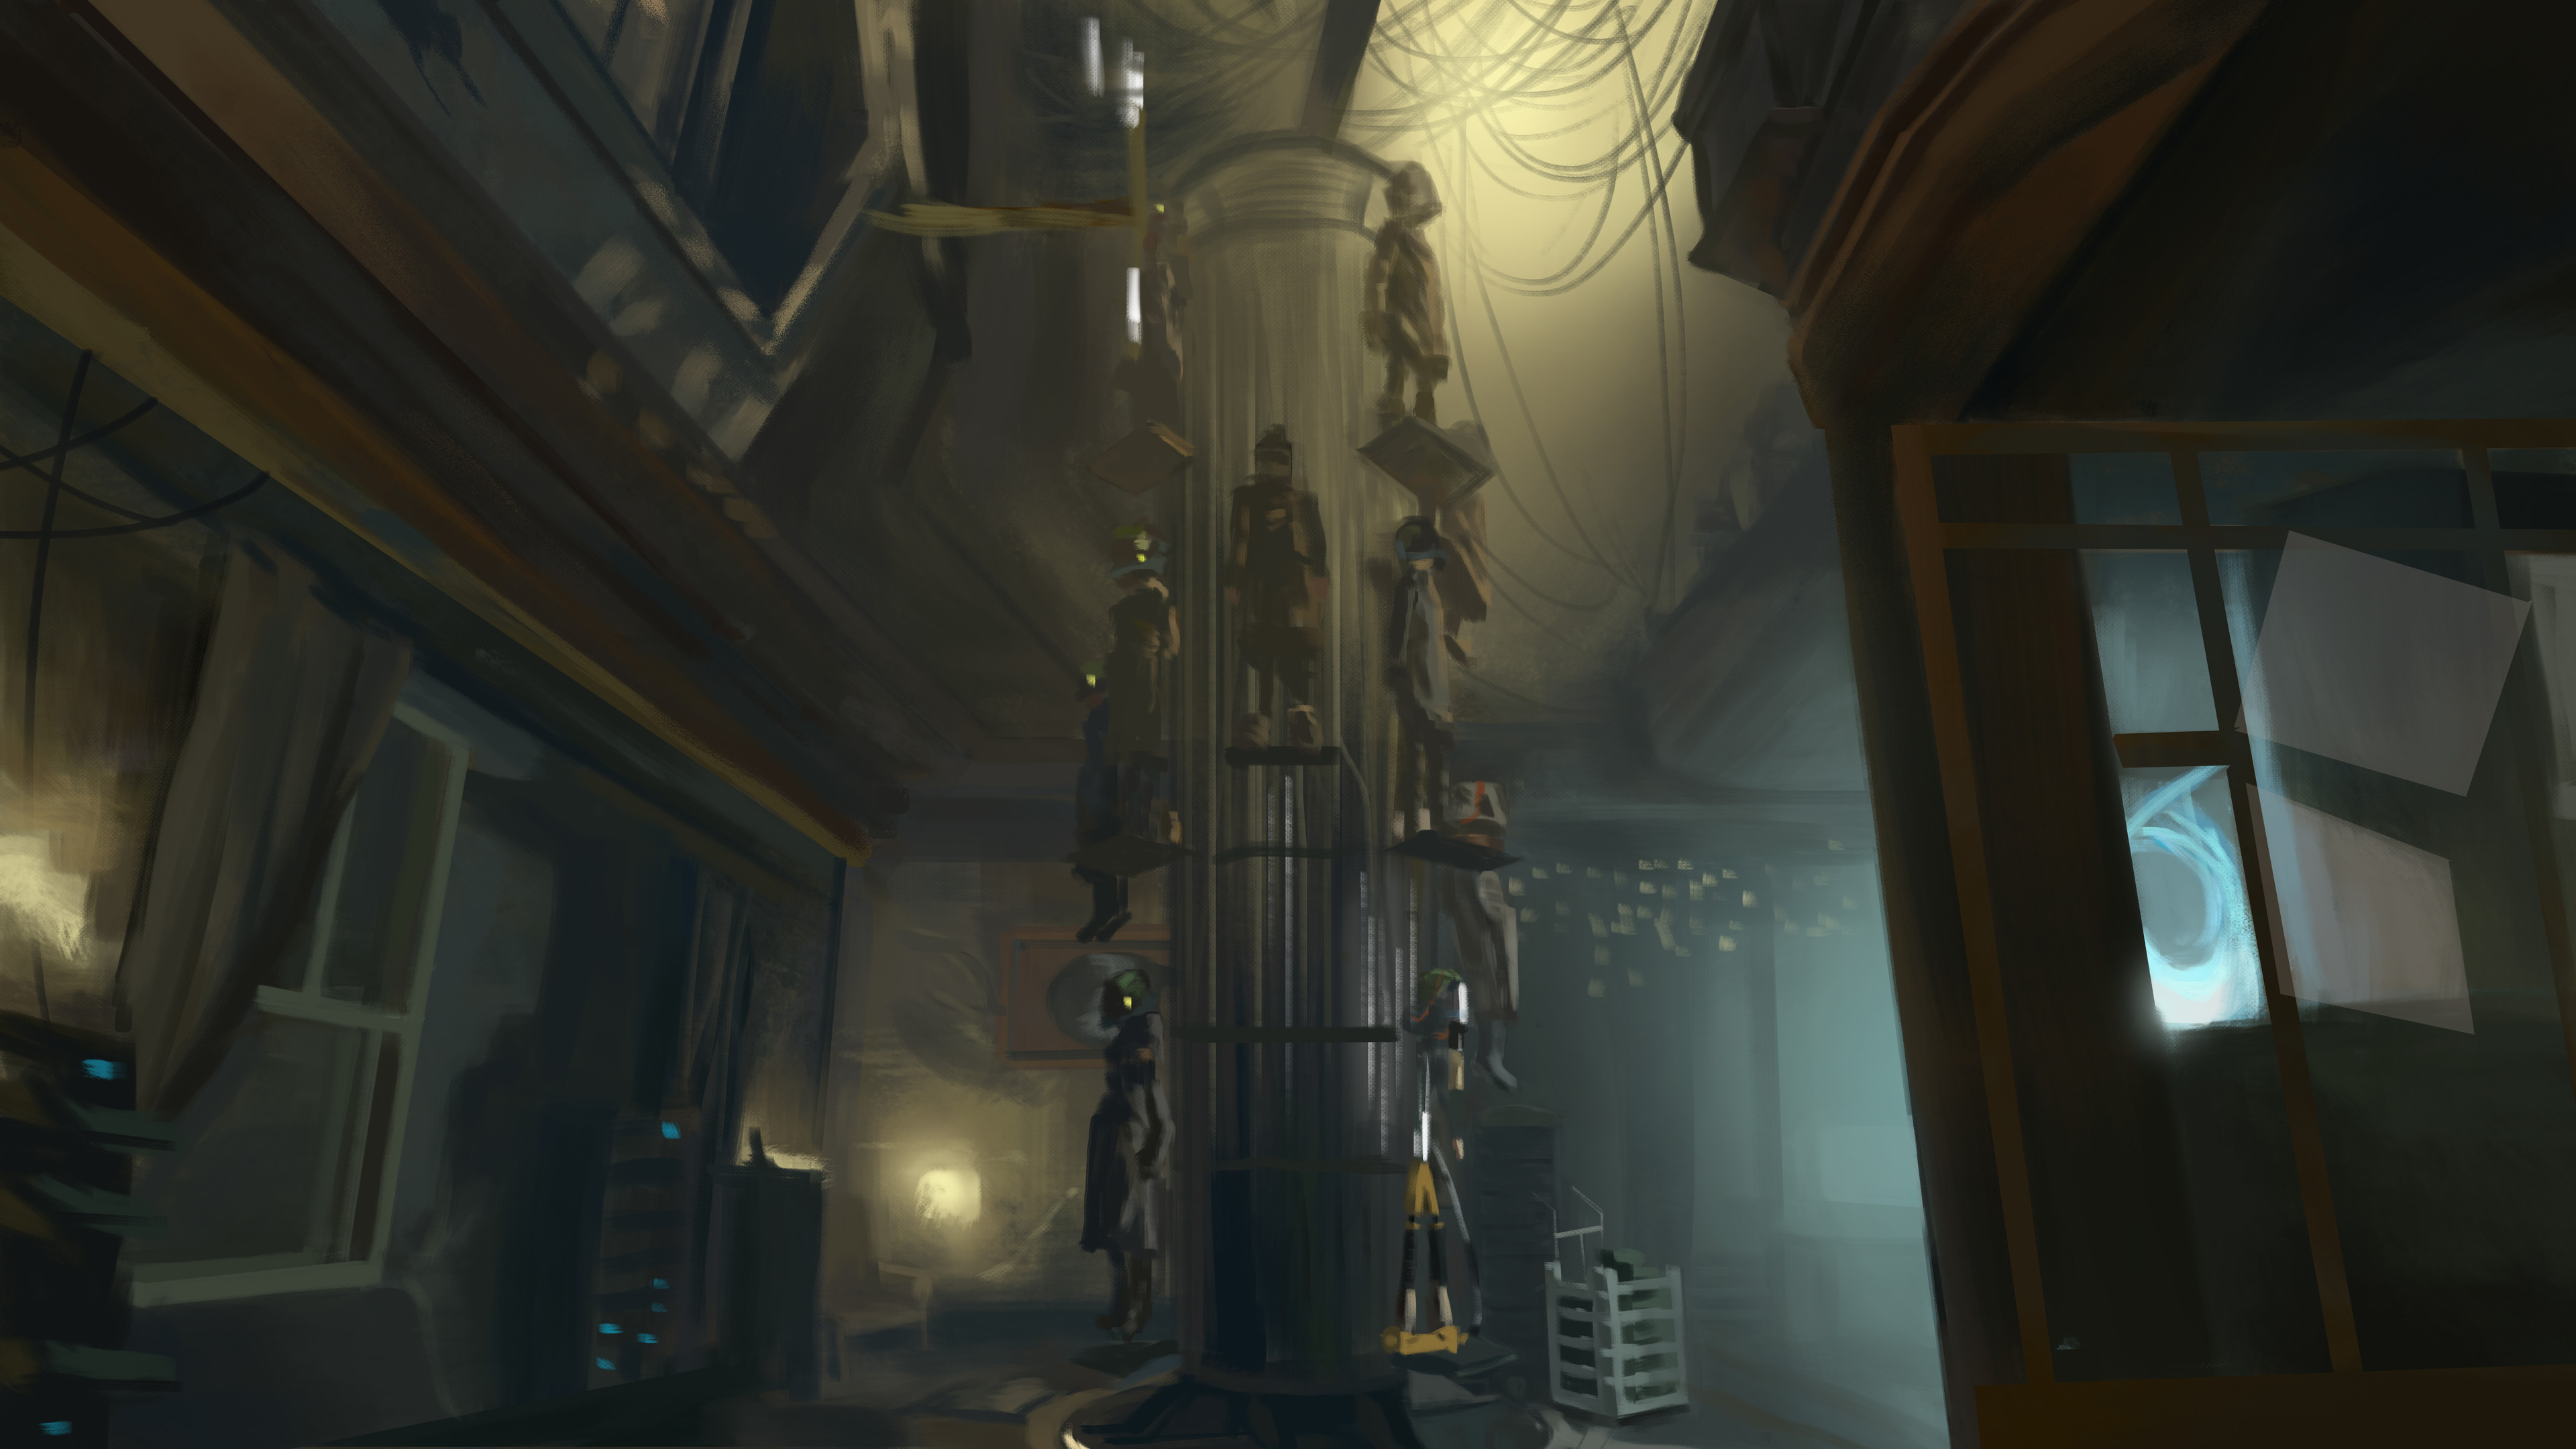 Painted scene from Deus Ex: Mankind Divided